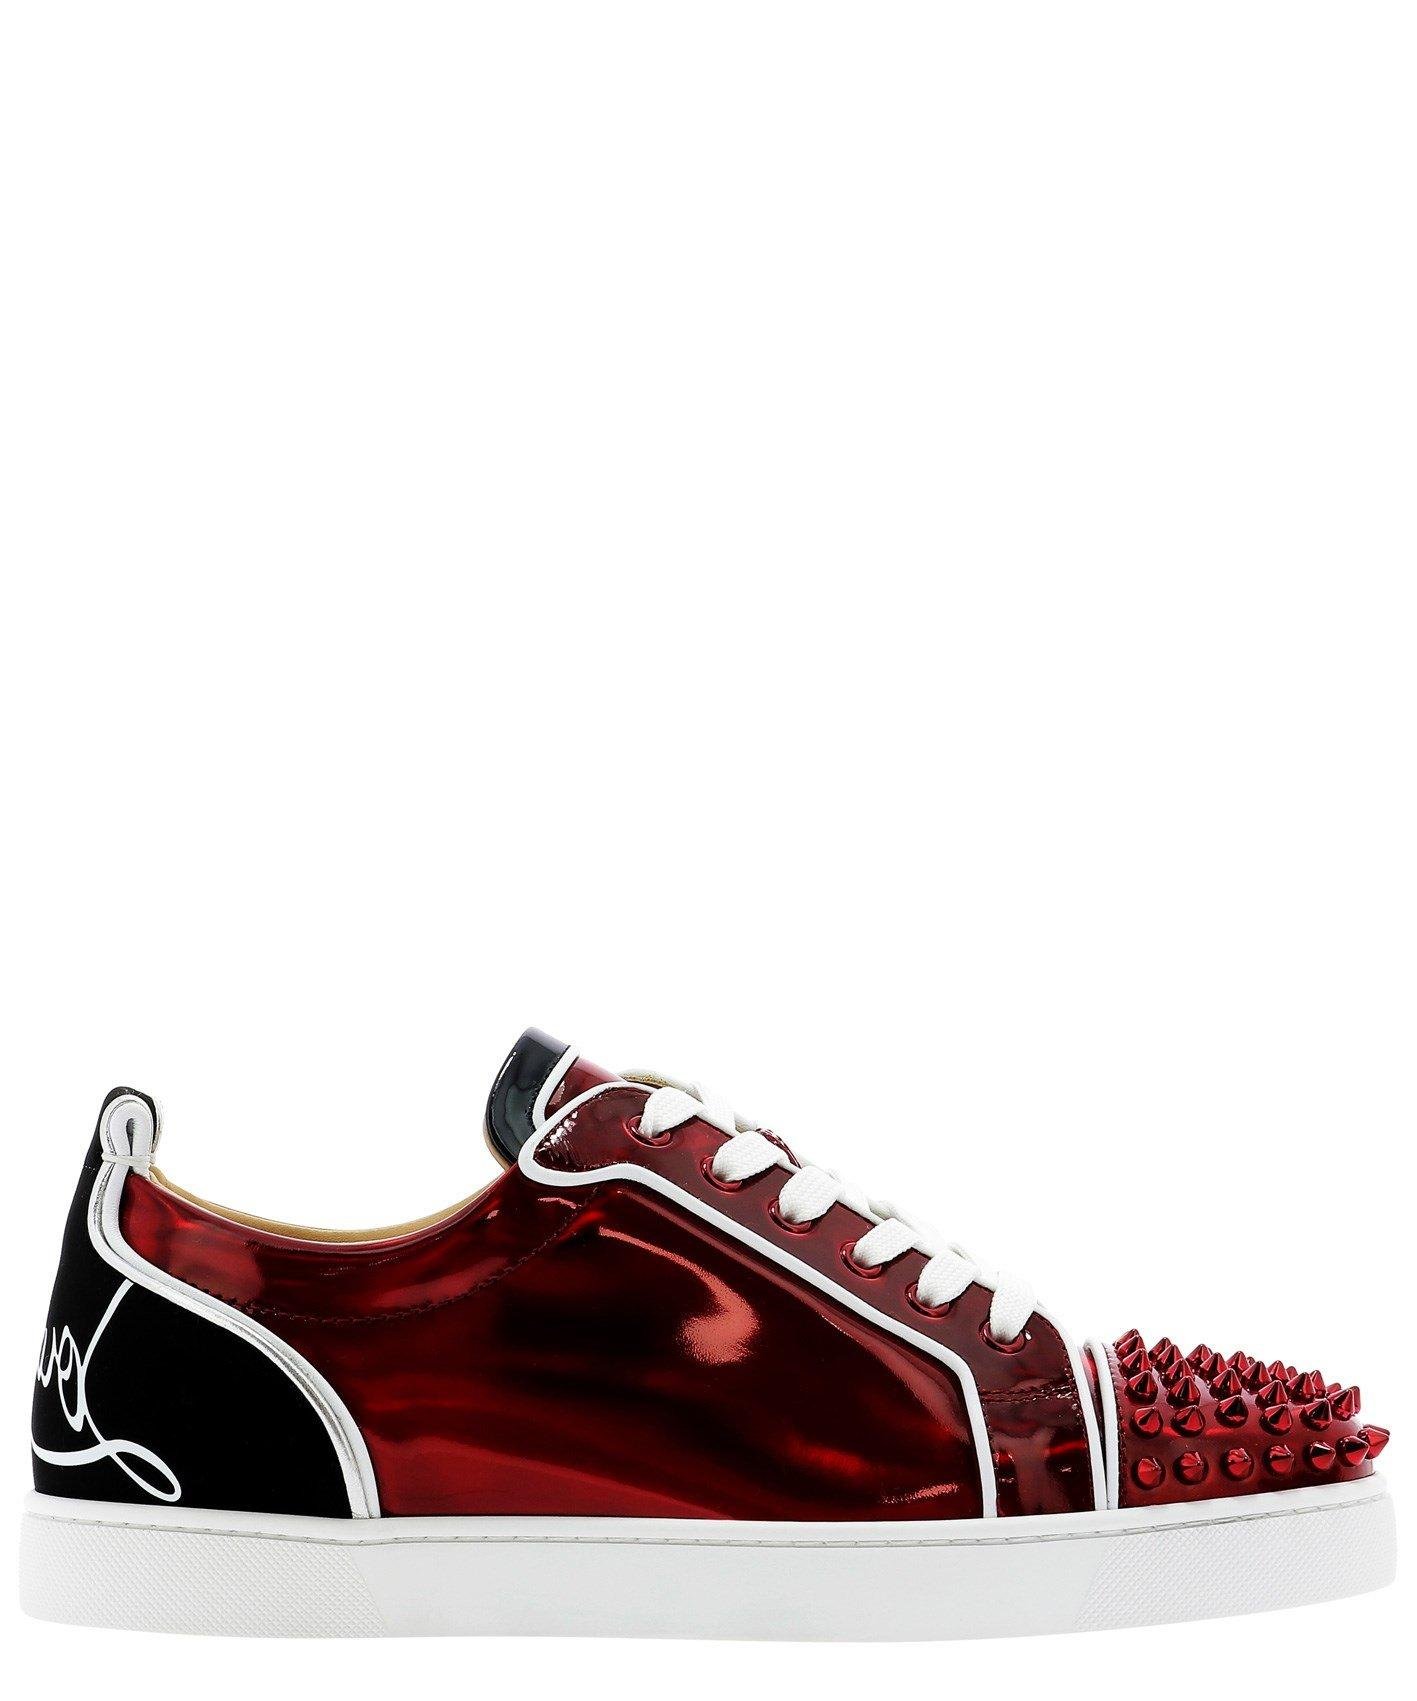 Christian Louboutin Fun Louis Junior Spikes Sneakers in Red for